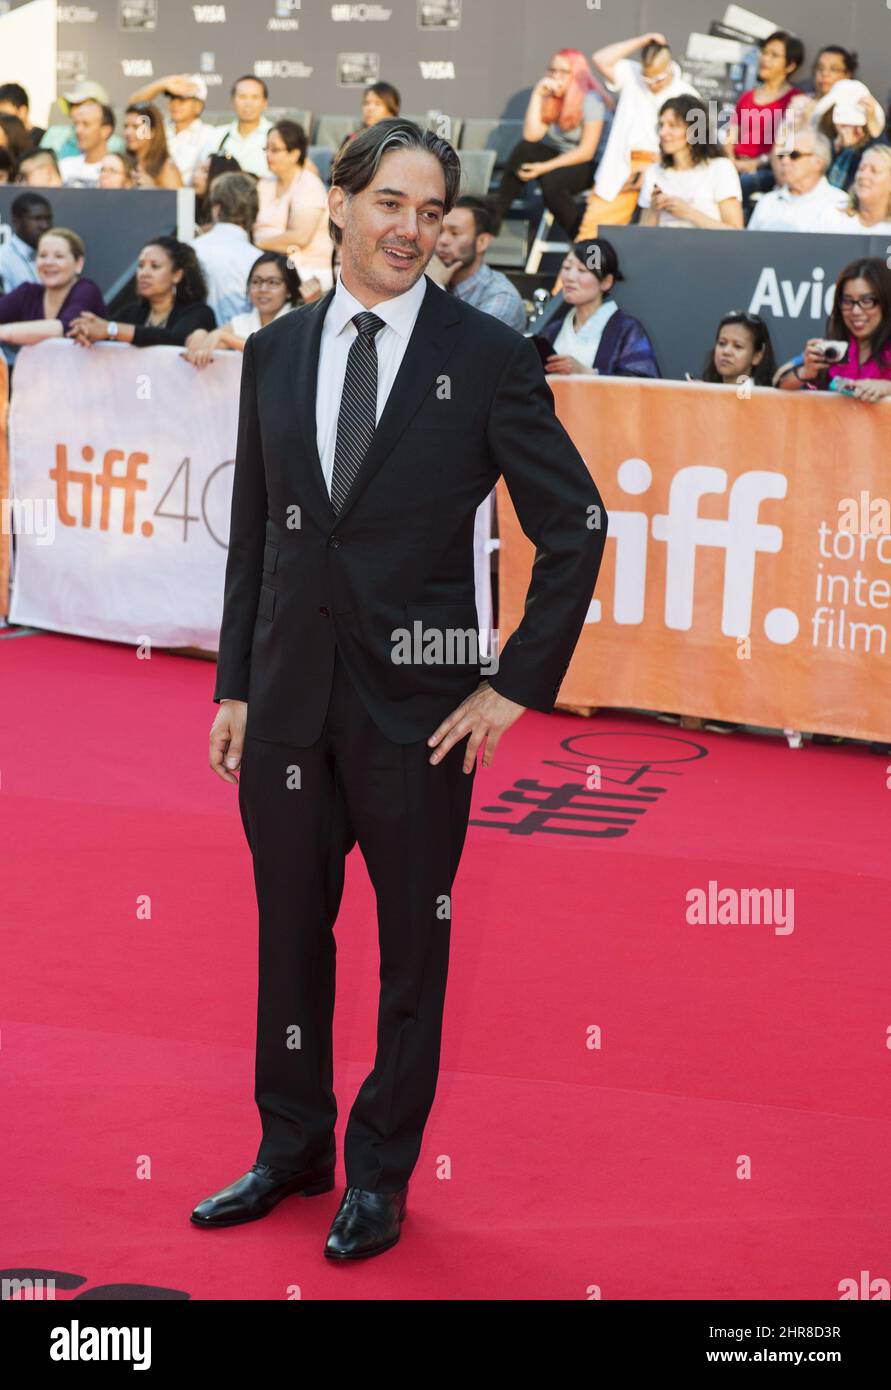 Director Matthew Brown poses for photos on the red carpet at the gala for the film "The Man Who Knew Infinity,"' at the 2015 Toronto International Film Festival on Thursday, Sept. 17, 2015. THE CANADIAN PRESS/Frank Gunn Stock Photo